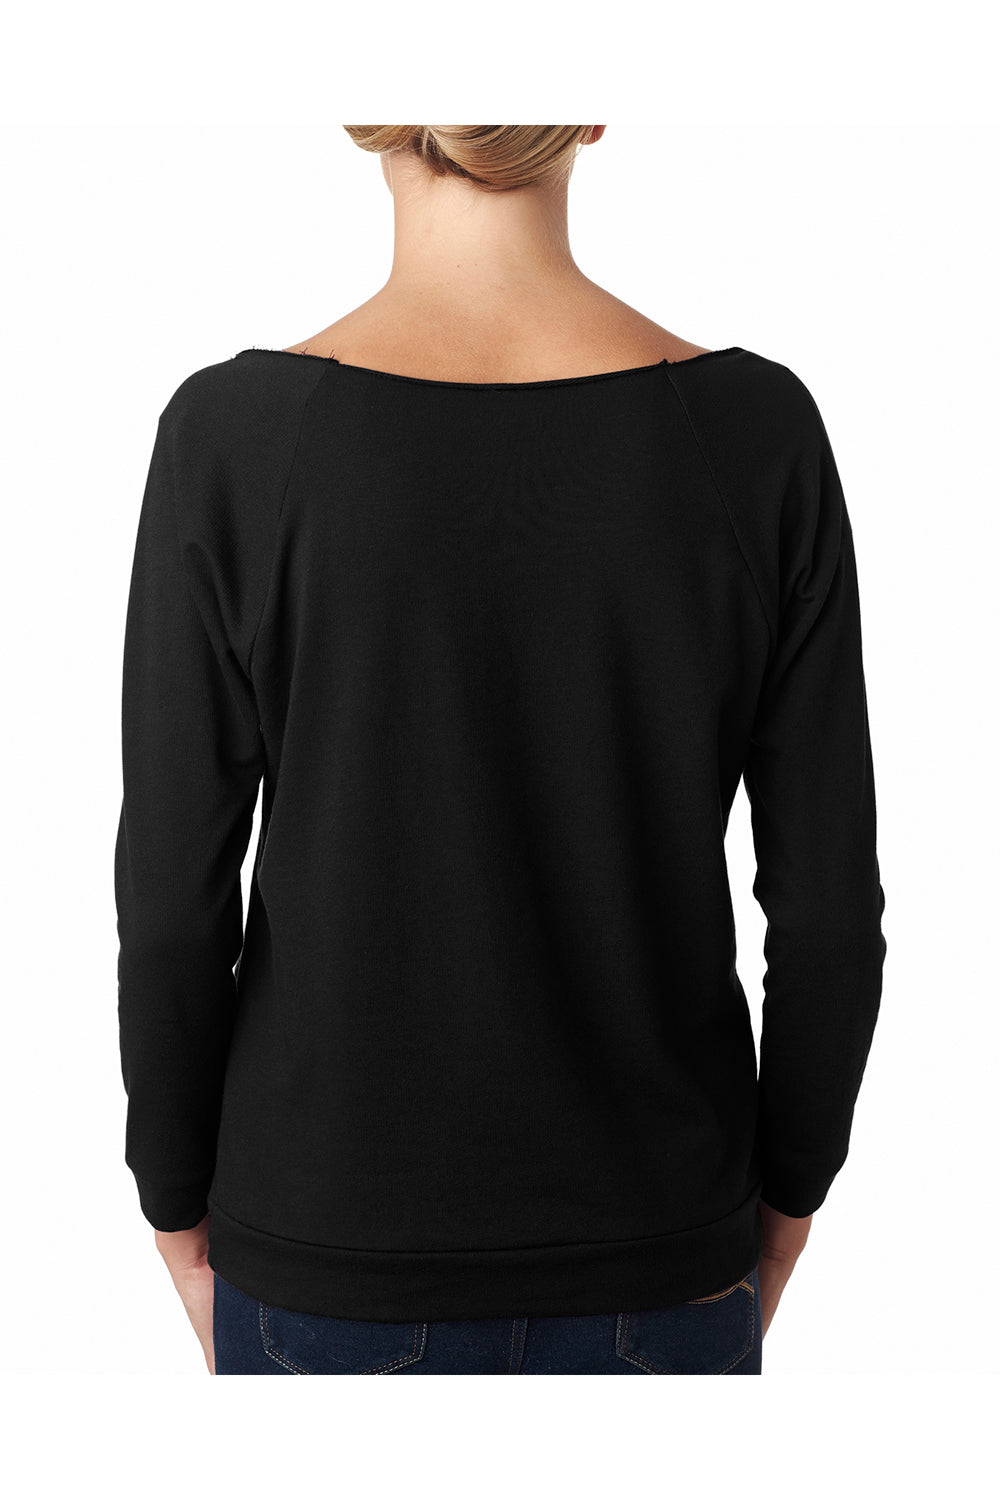 Next Level 6951 Womens French Terry 3/4 Sleeve Wide Neck T-Shirt Black Back